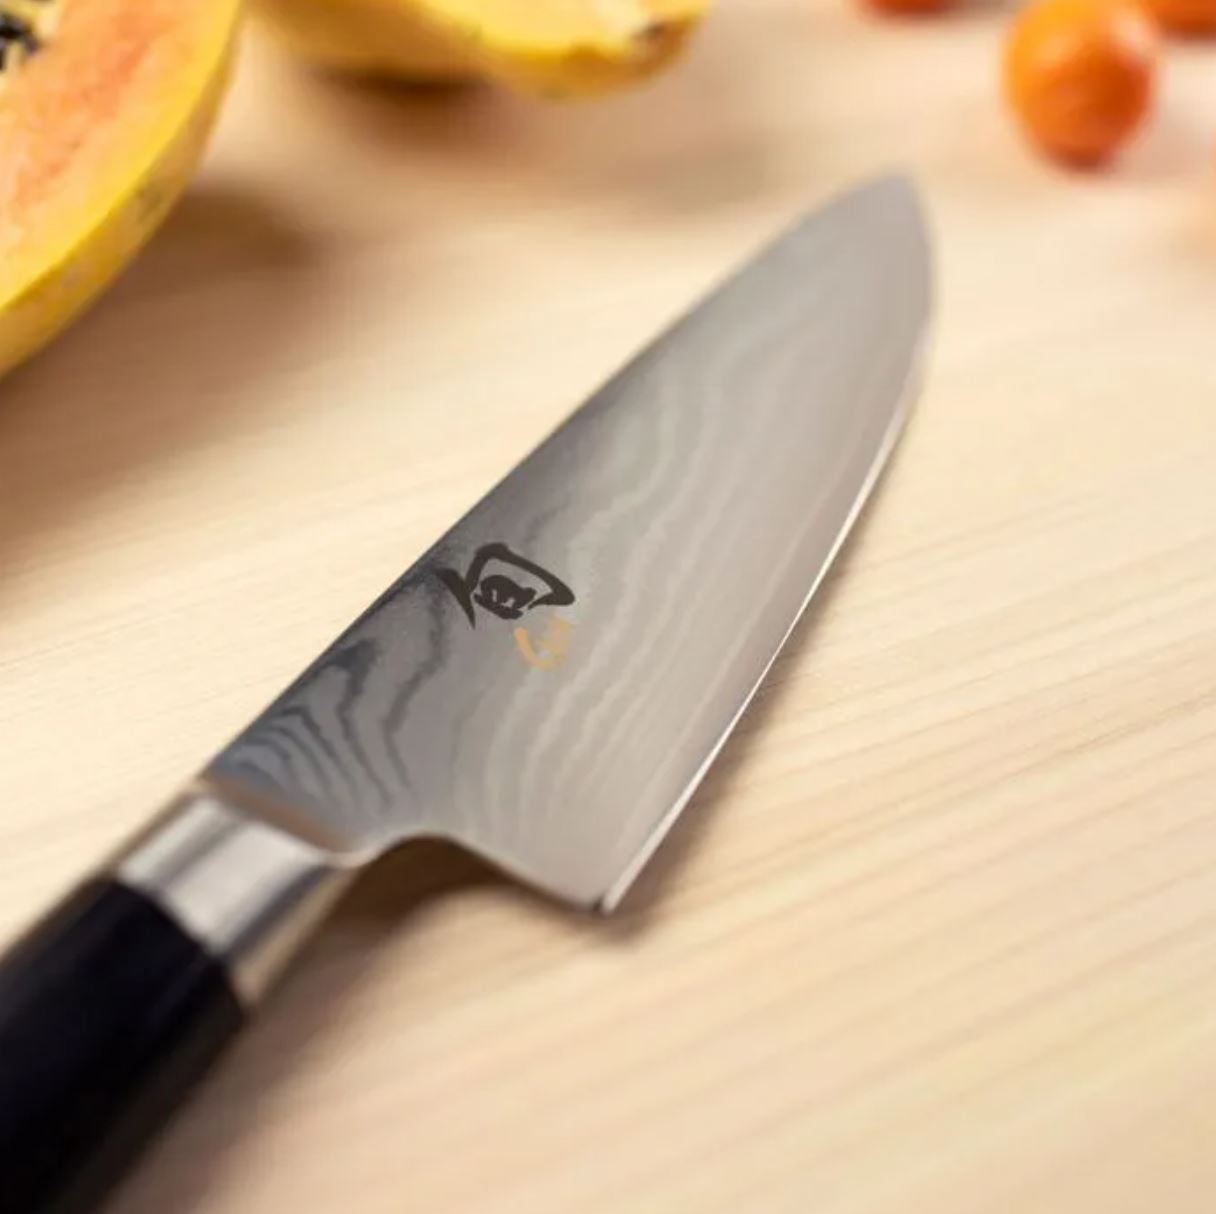 Classic - 6" Chef's Knife